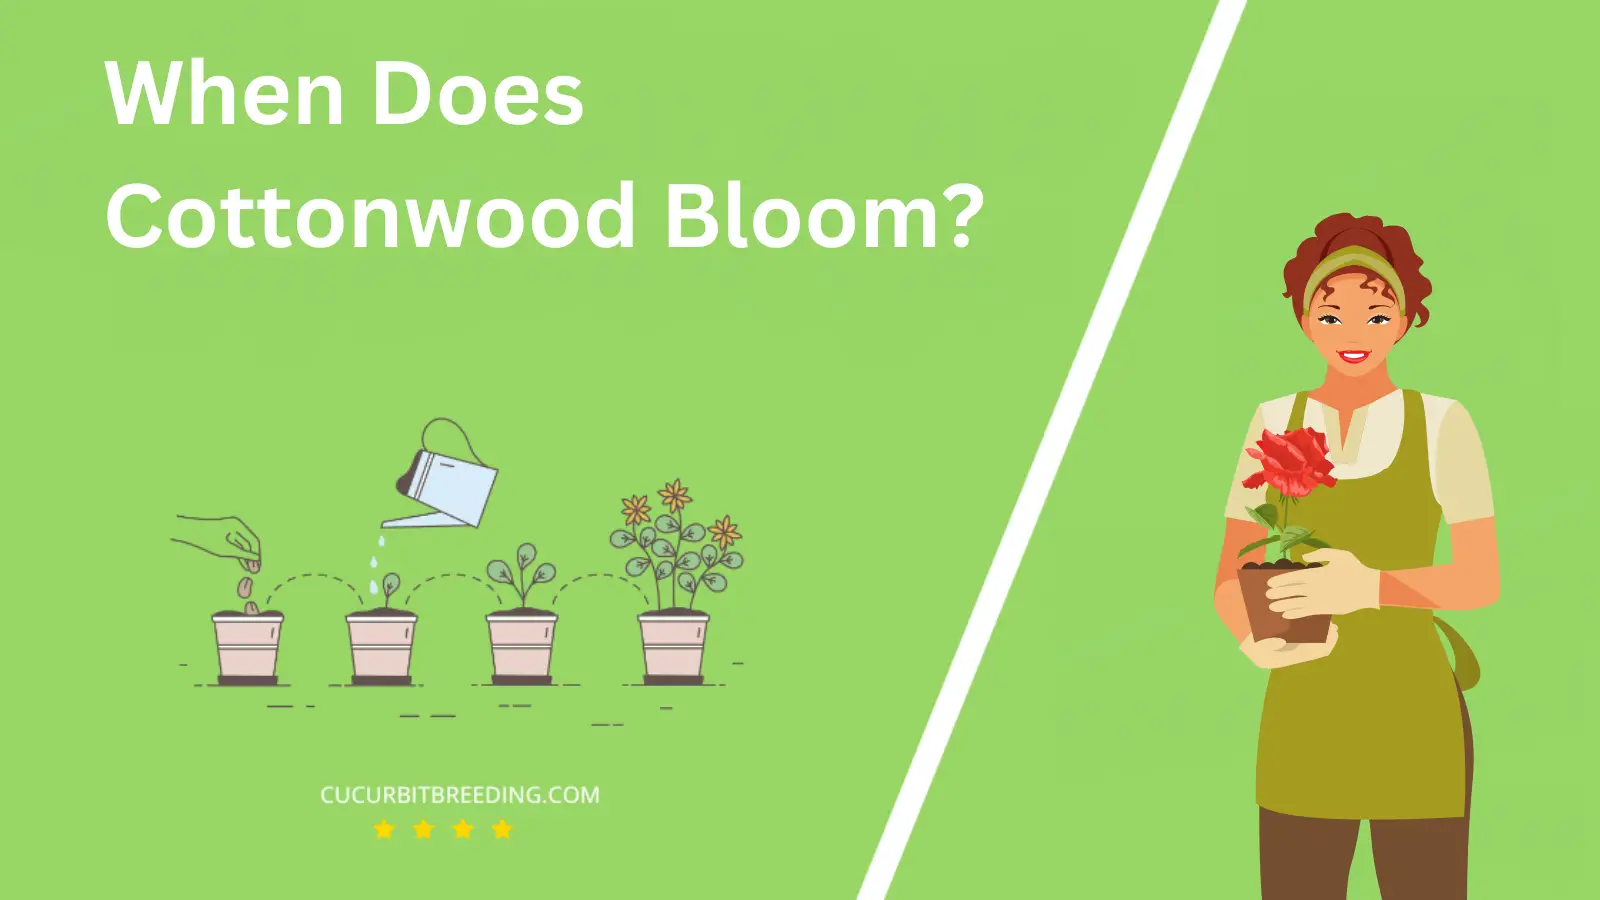 When Does Cottonwood Bloom?